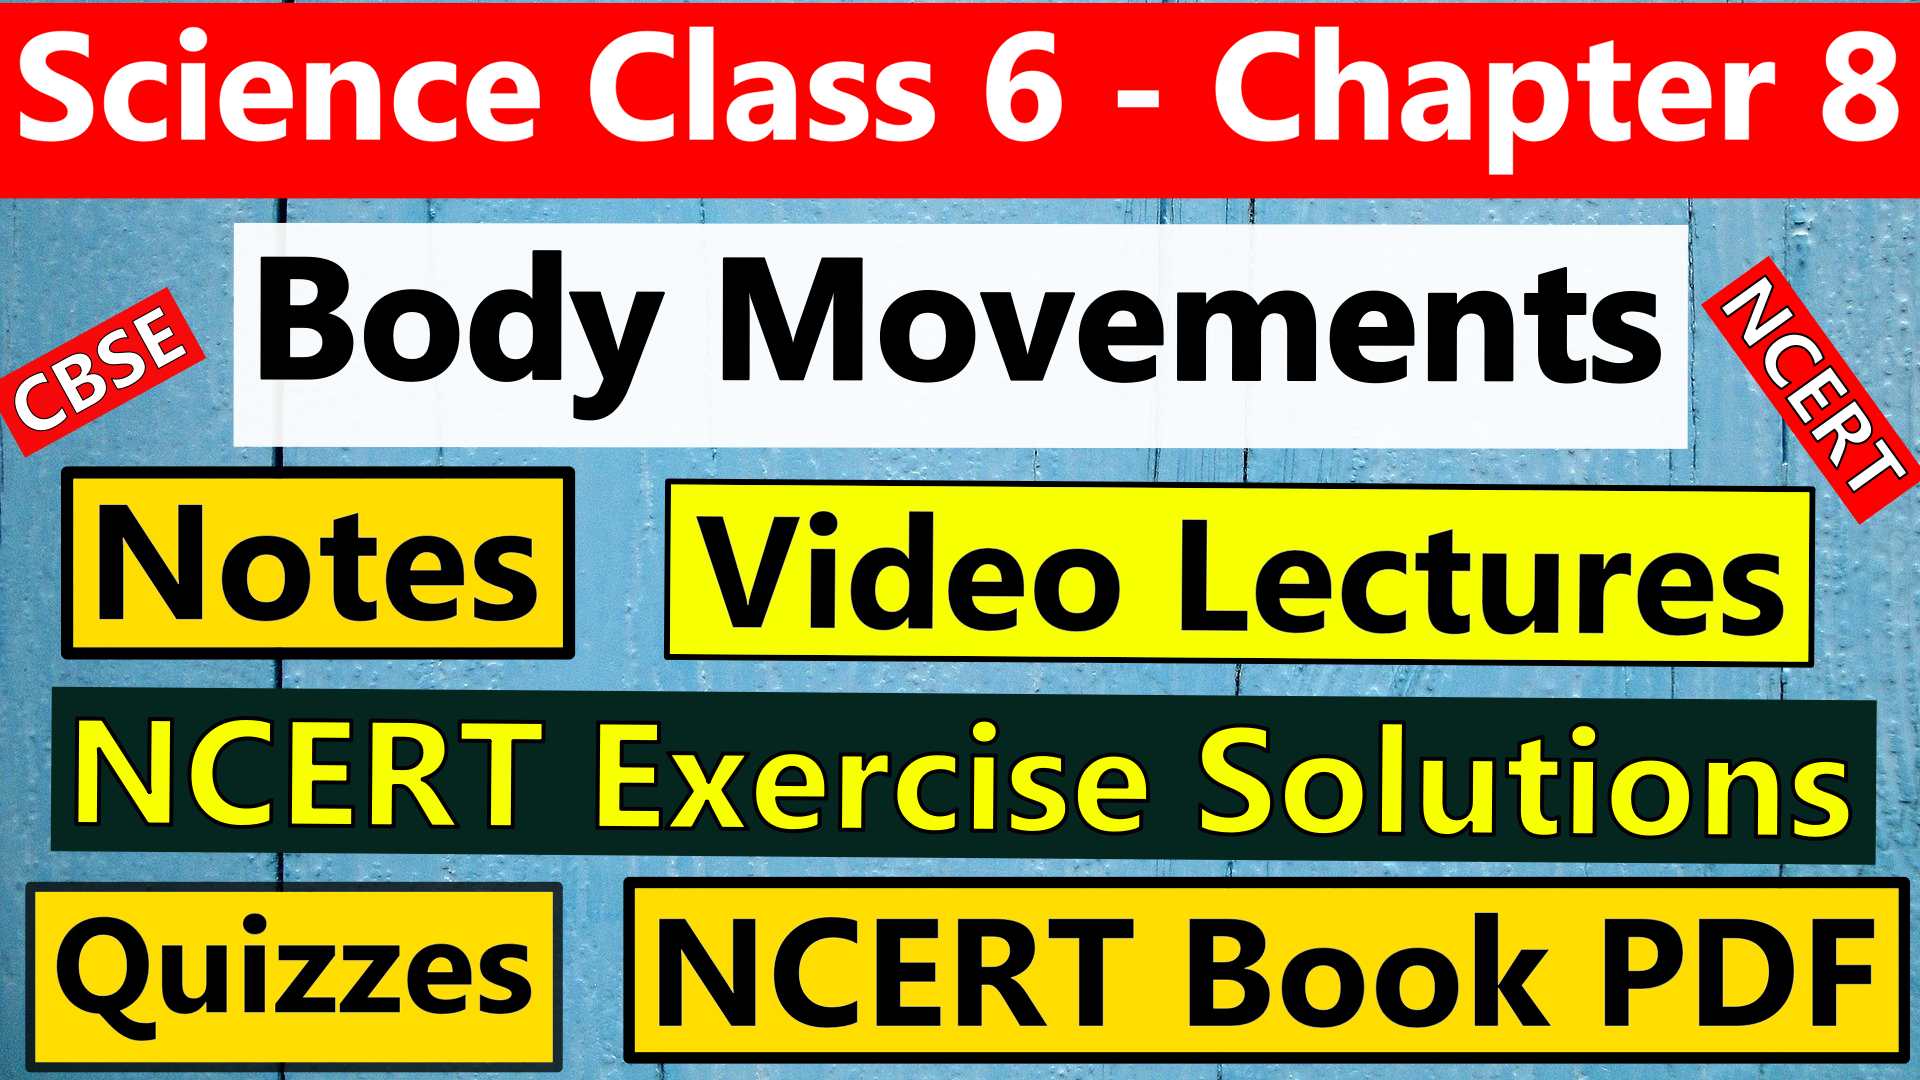 CBSE Science Class 6 - Chapter 8 -Body Movements - Notes, Video Lecture, NCERT Exercise Solution, Quizzes, NCERT Book Chapter 8 PDF Download.